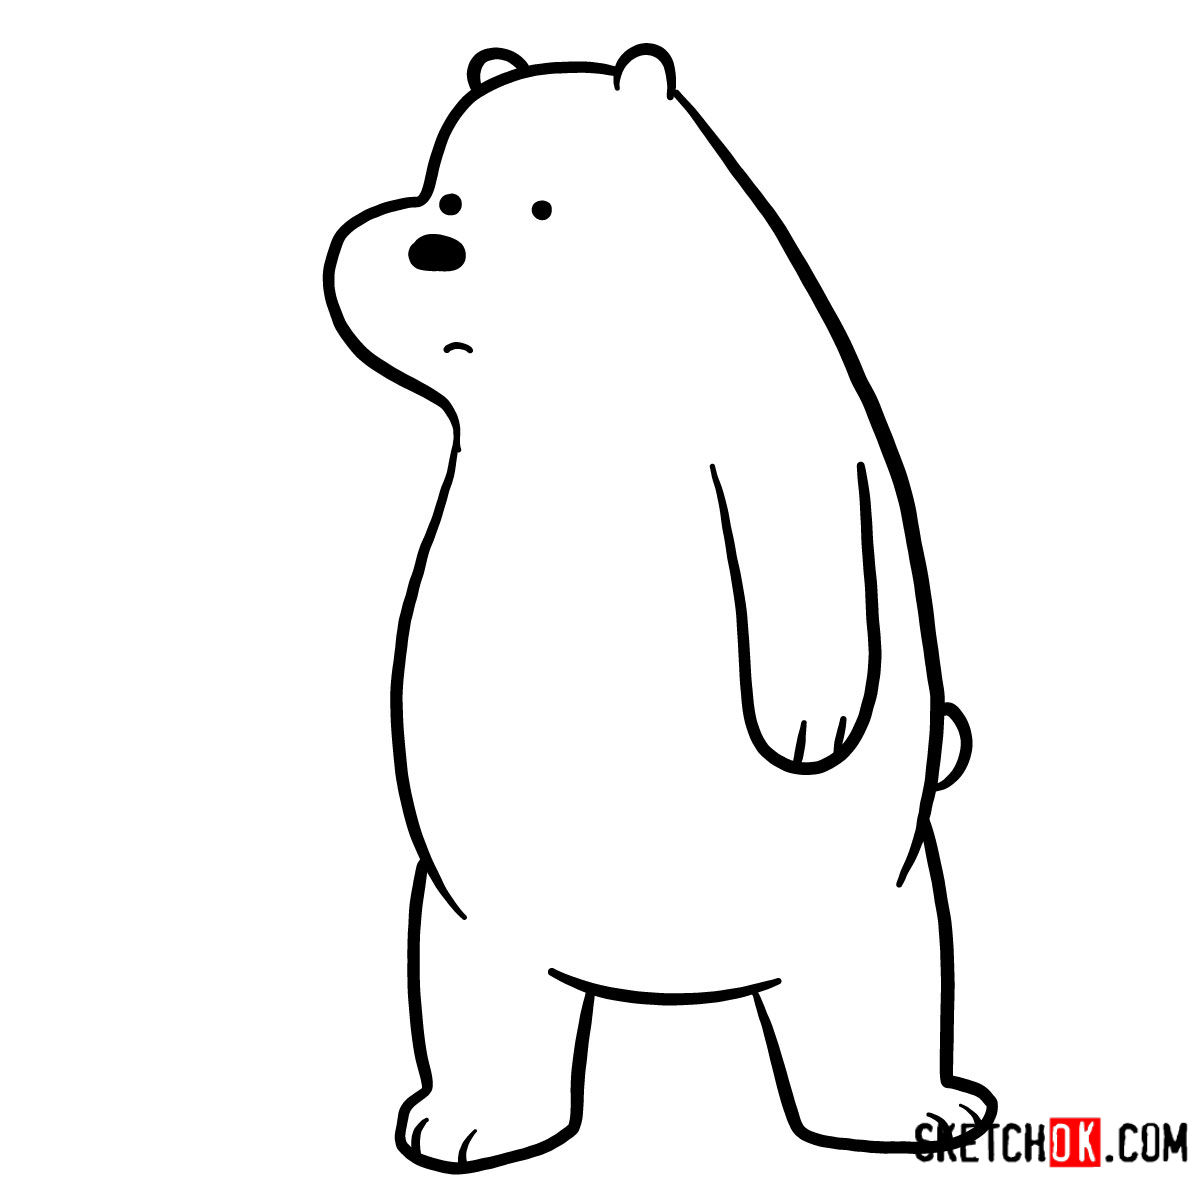 How To Draw Sad Ice Bear We Bare Bears Sketchok Easy Drawing Guides